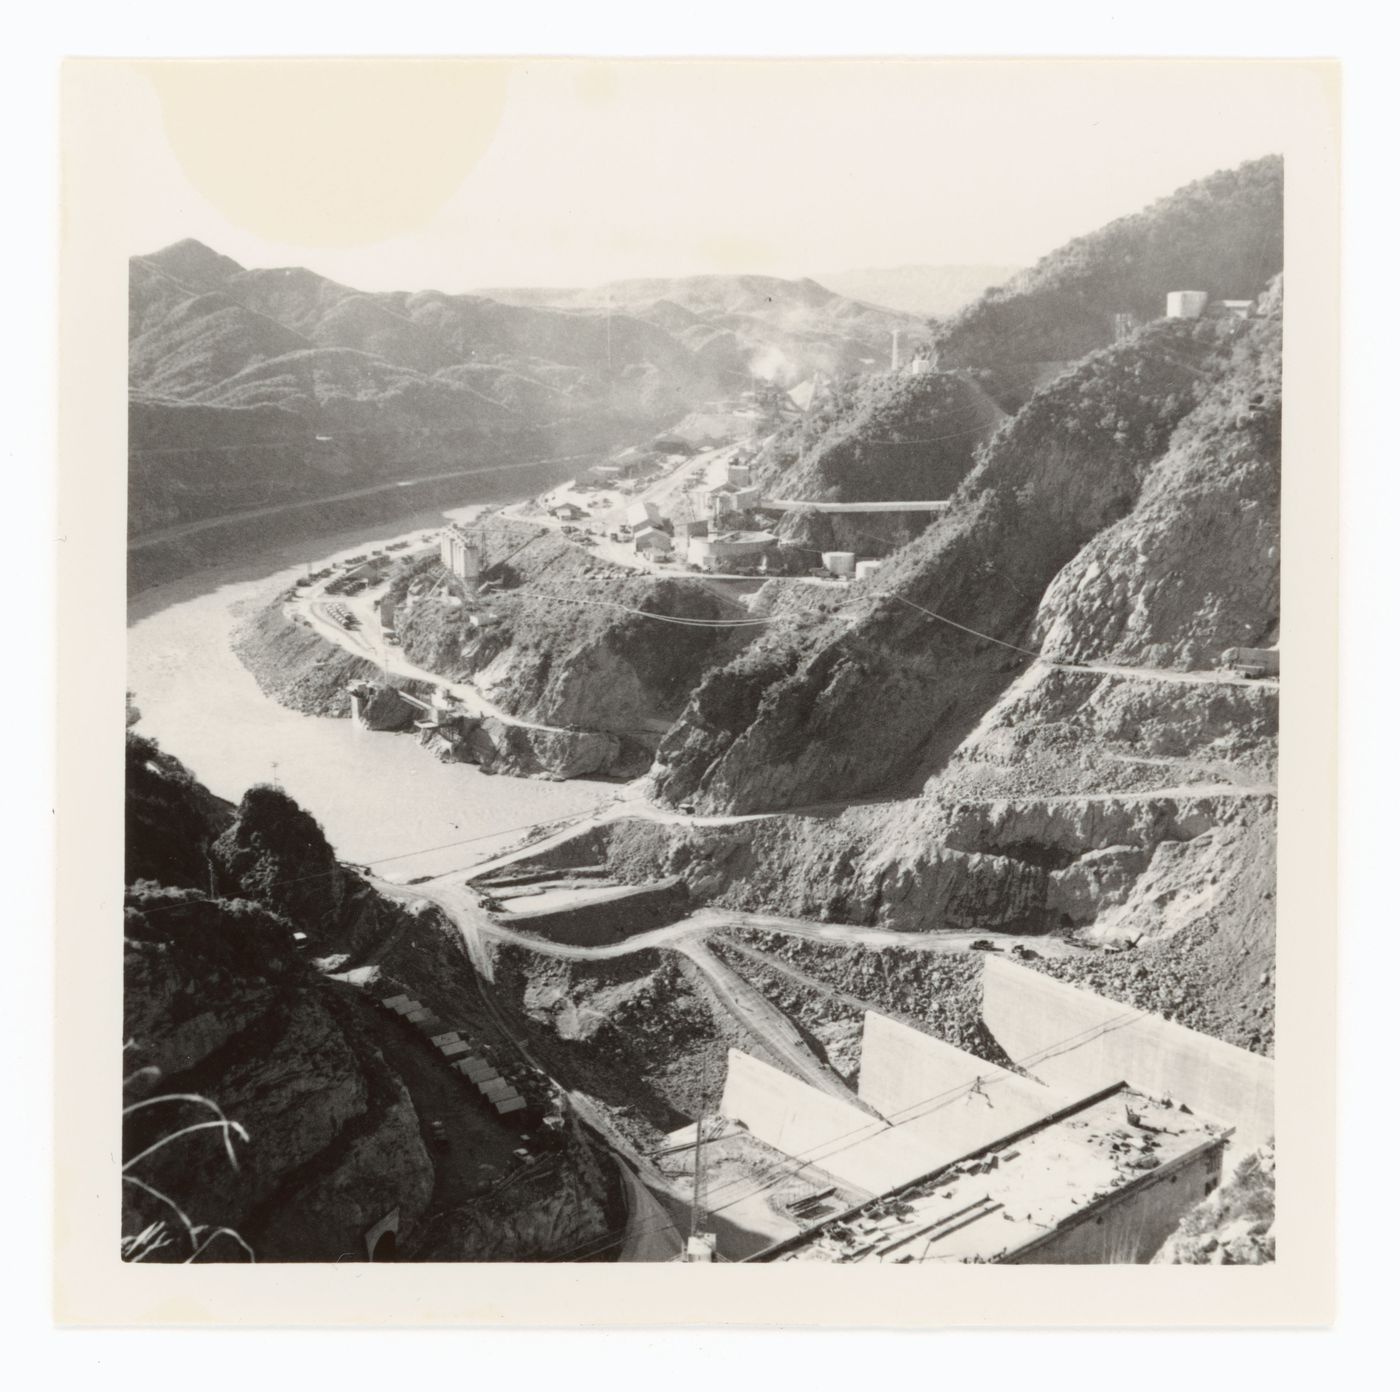 View of the Bhakra Dam under construction, India